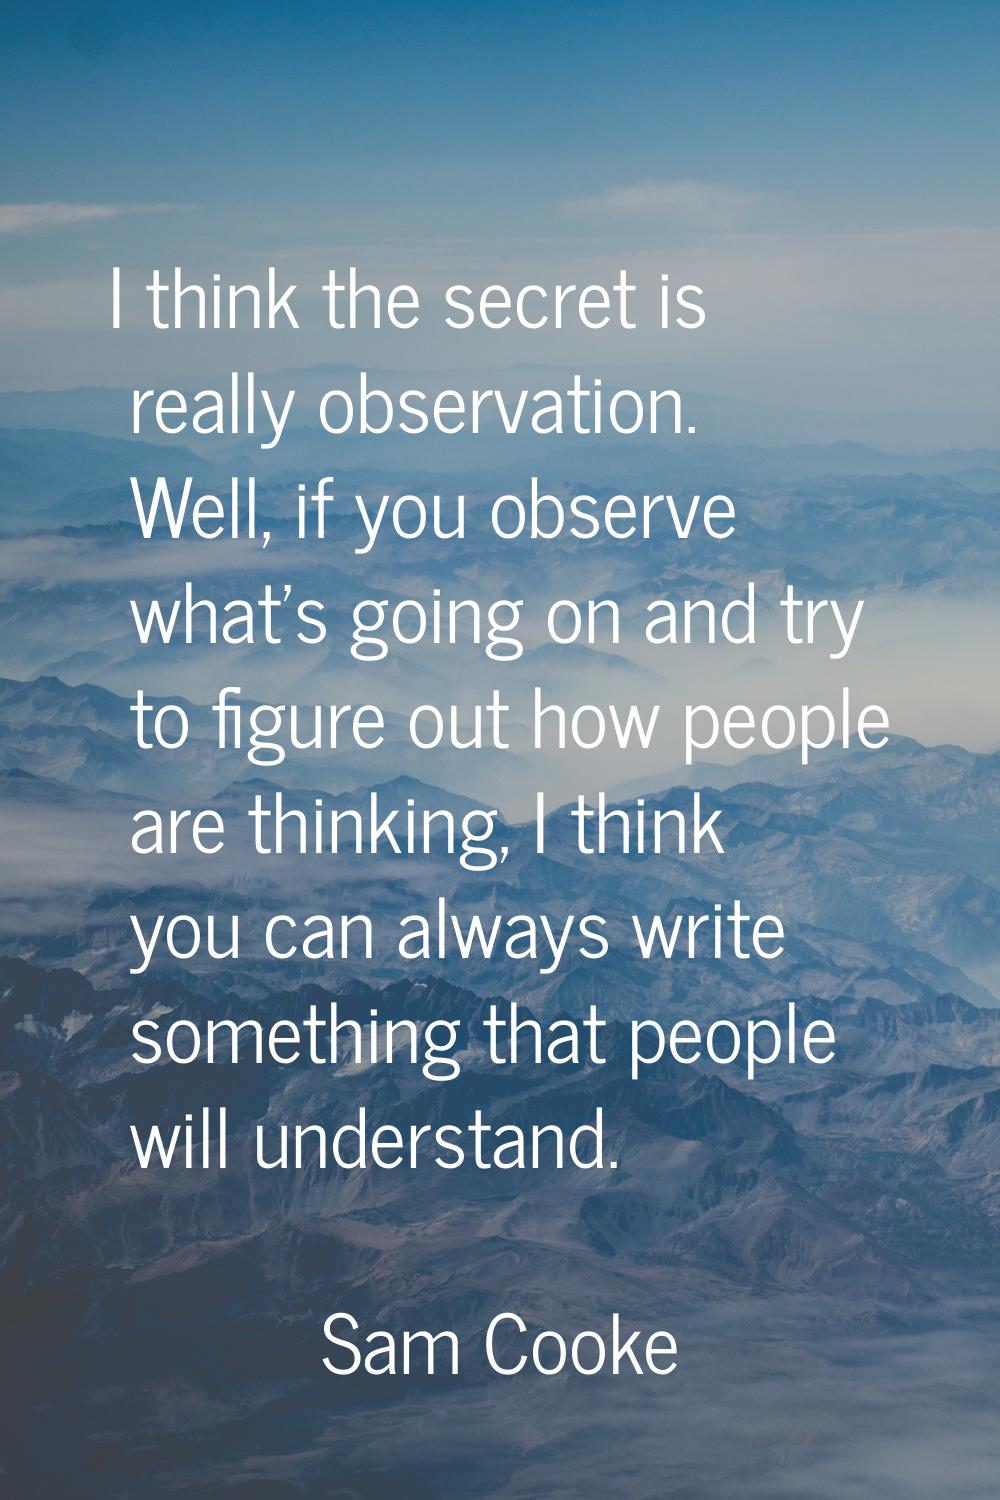 I think the secret is really observation. Well, if you observe what's going on and try to figure ou